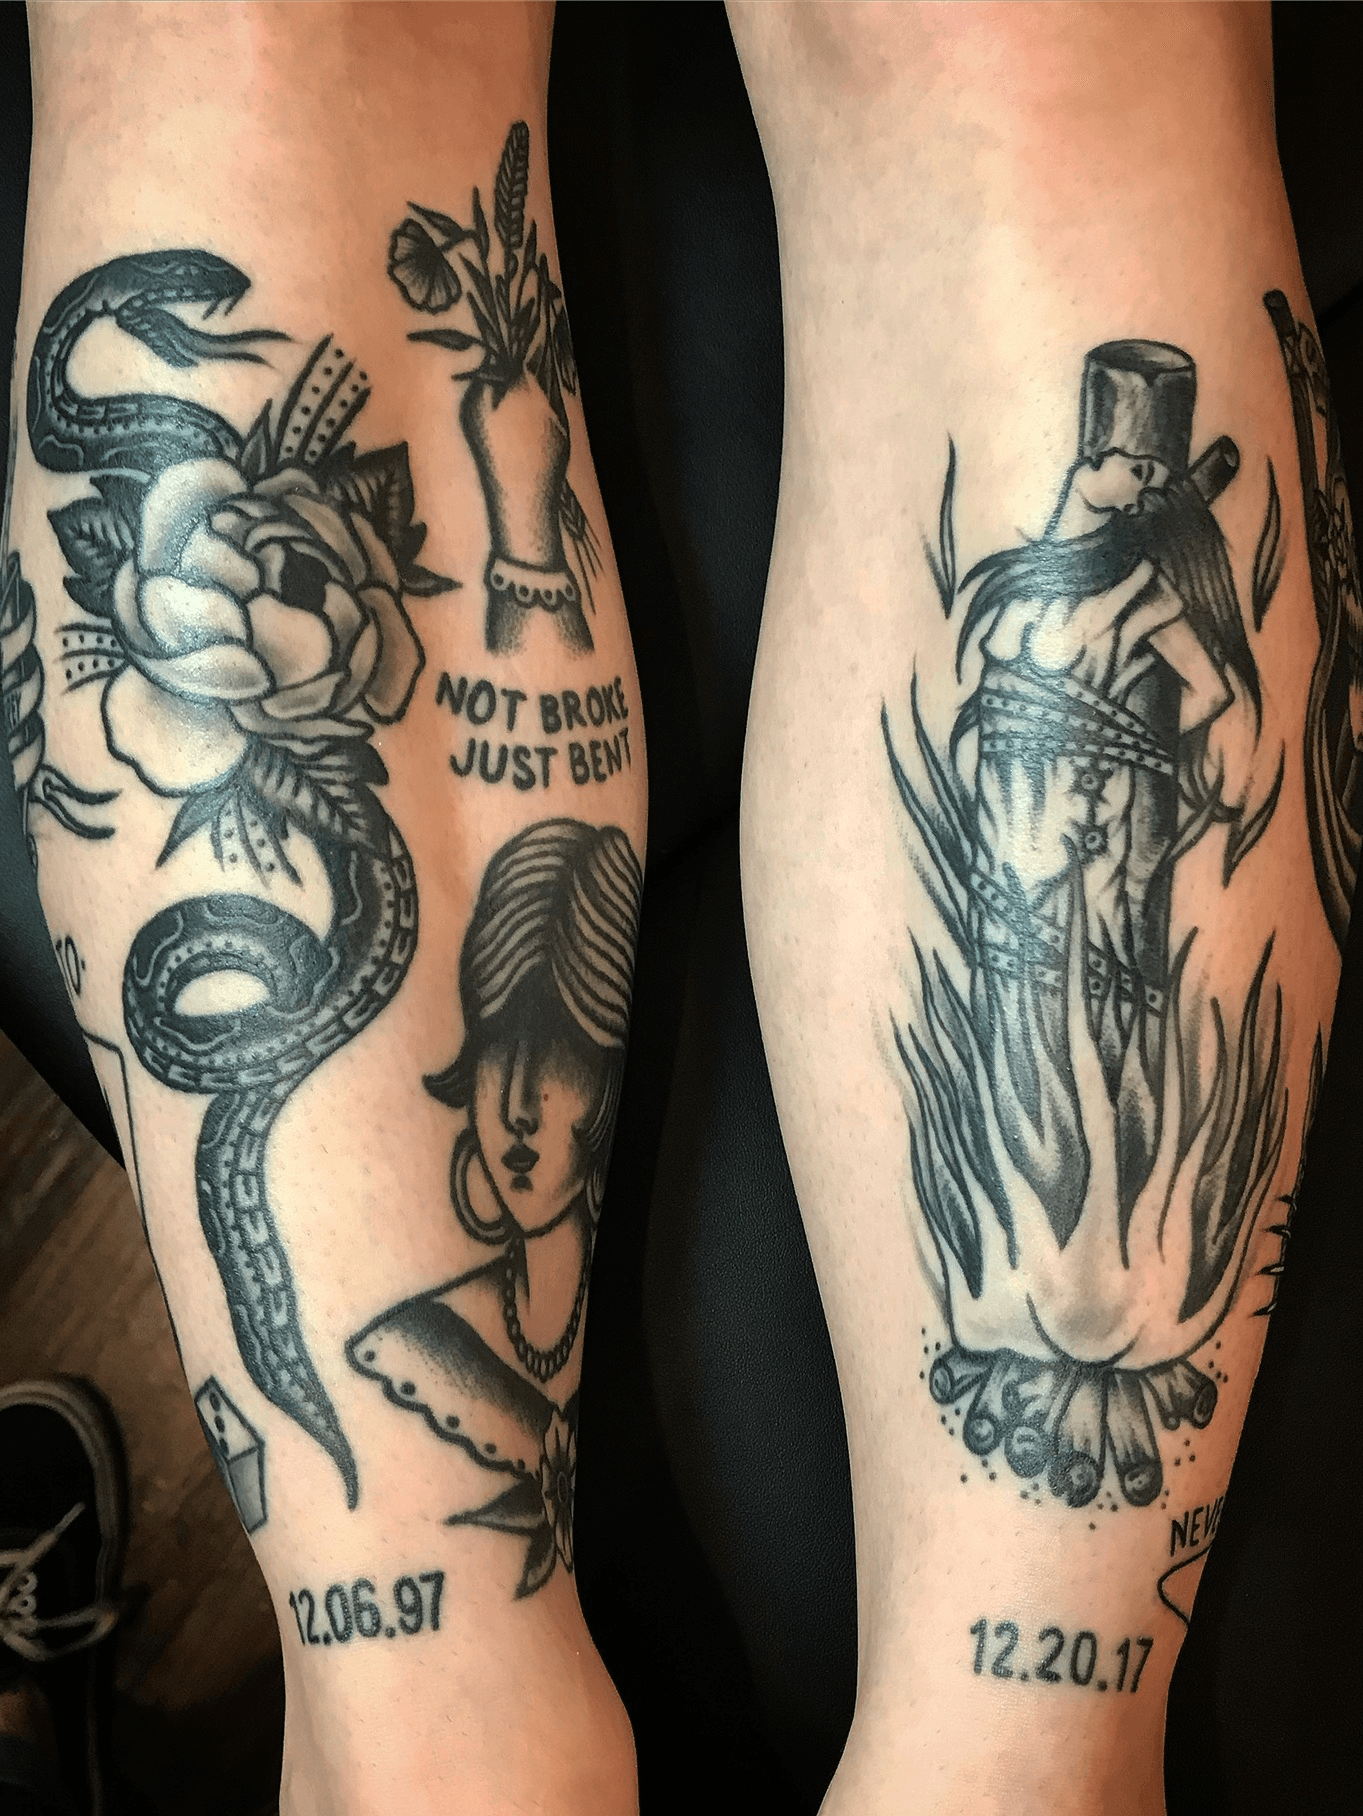 Spellbinding Witchy Tattoos and What They Mean  CUSTOM TATTOO DESIGN